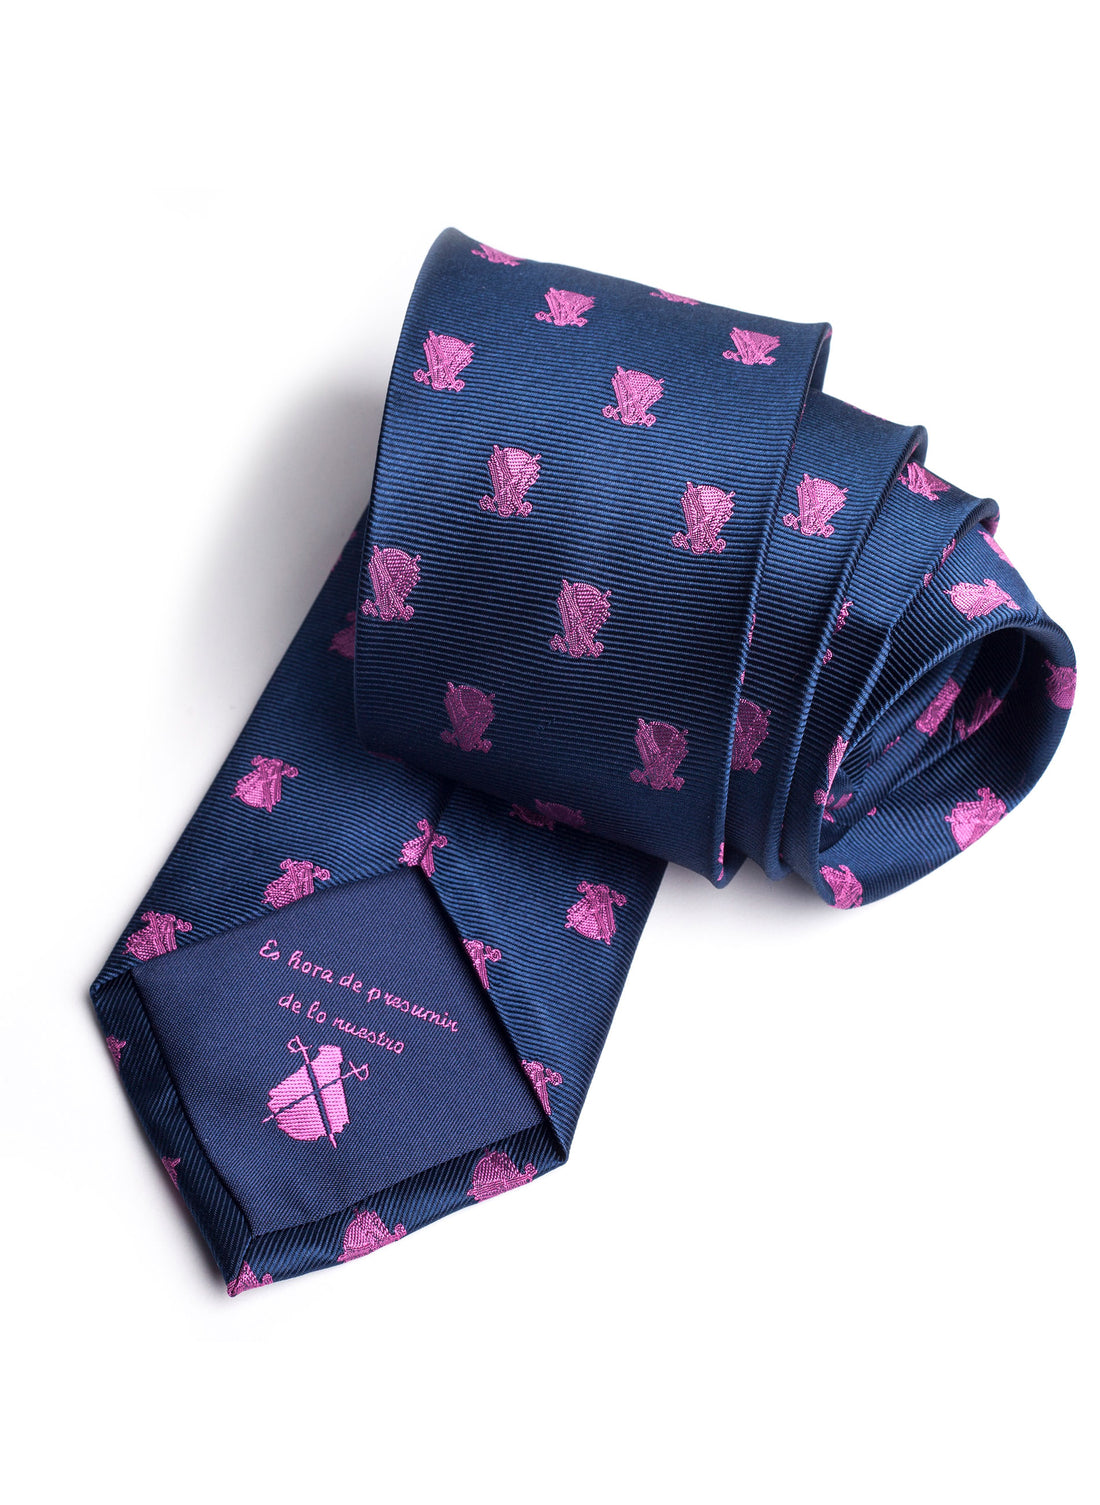 Blue Tie with Pink Capotes